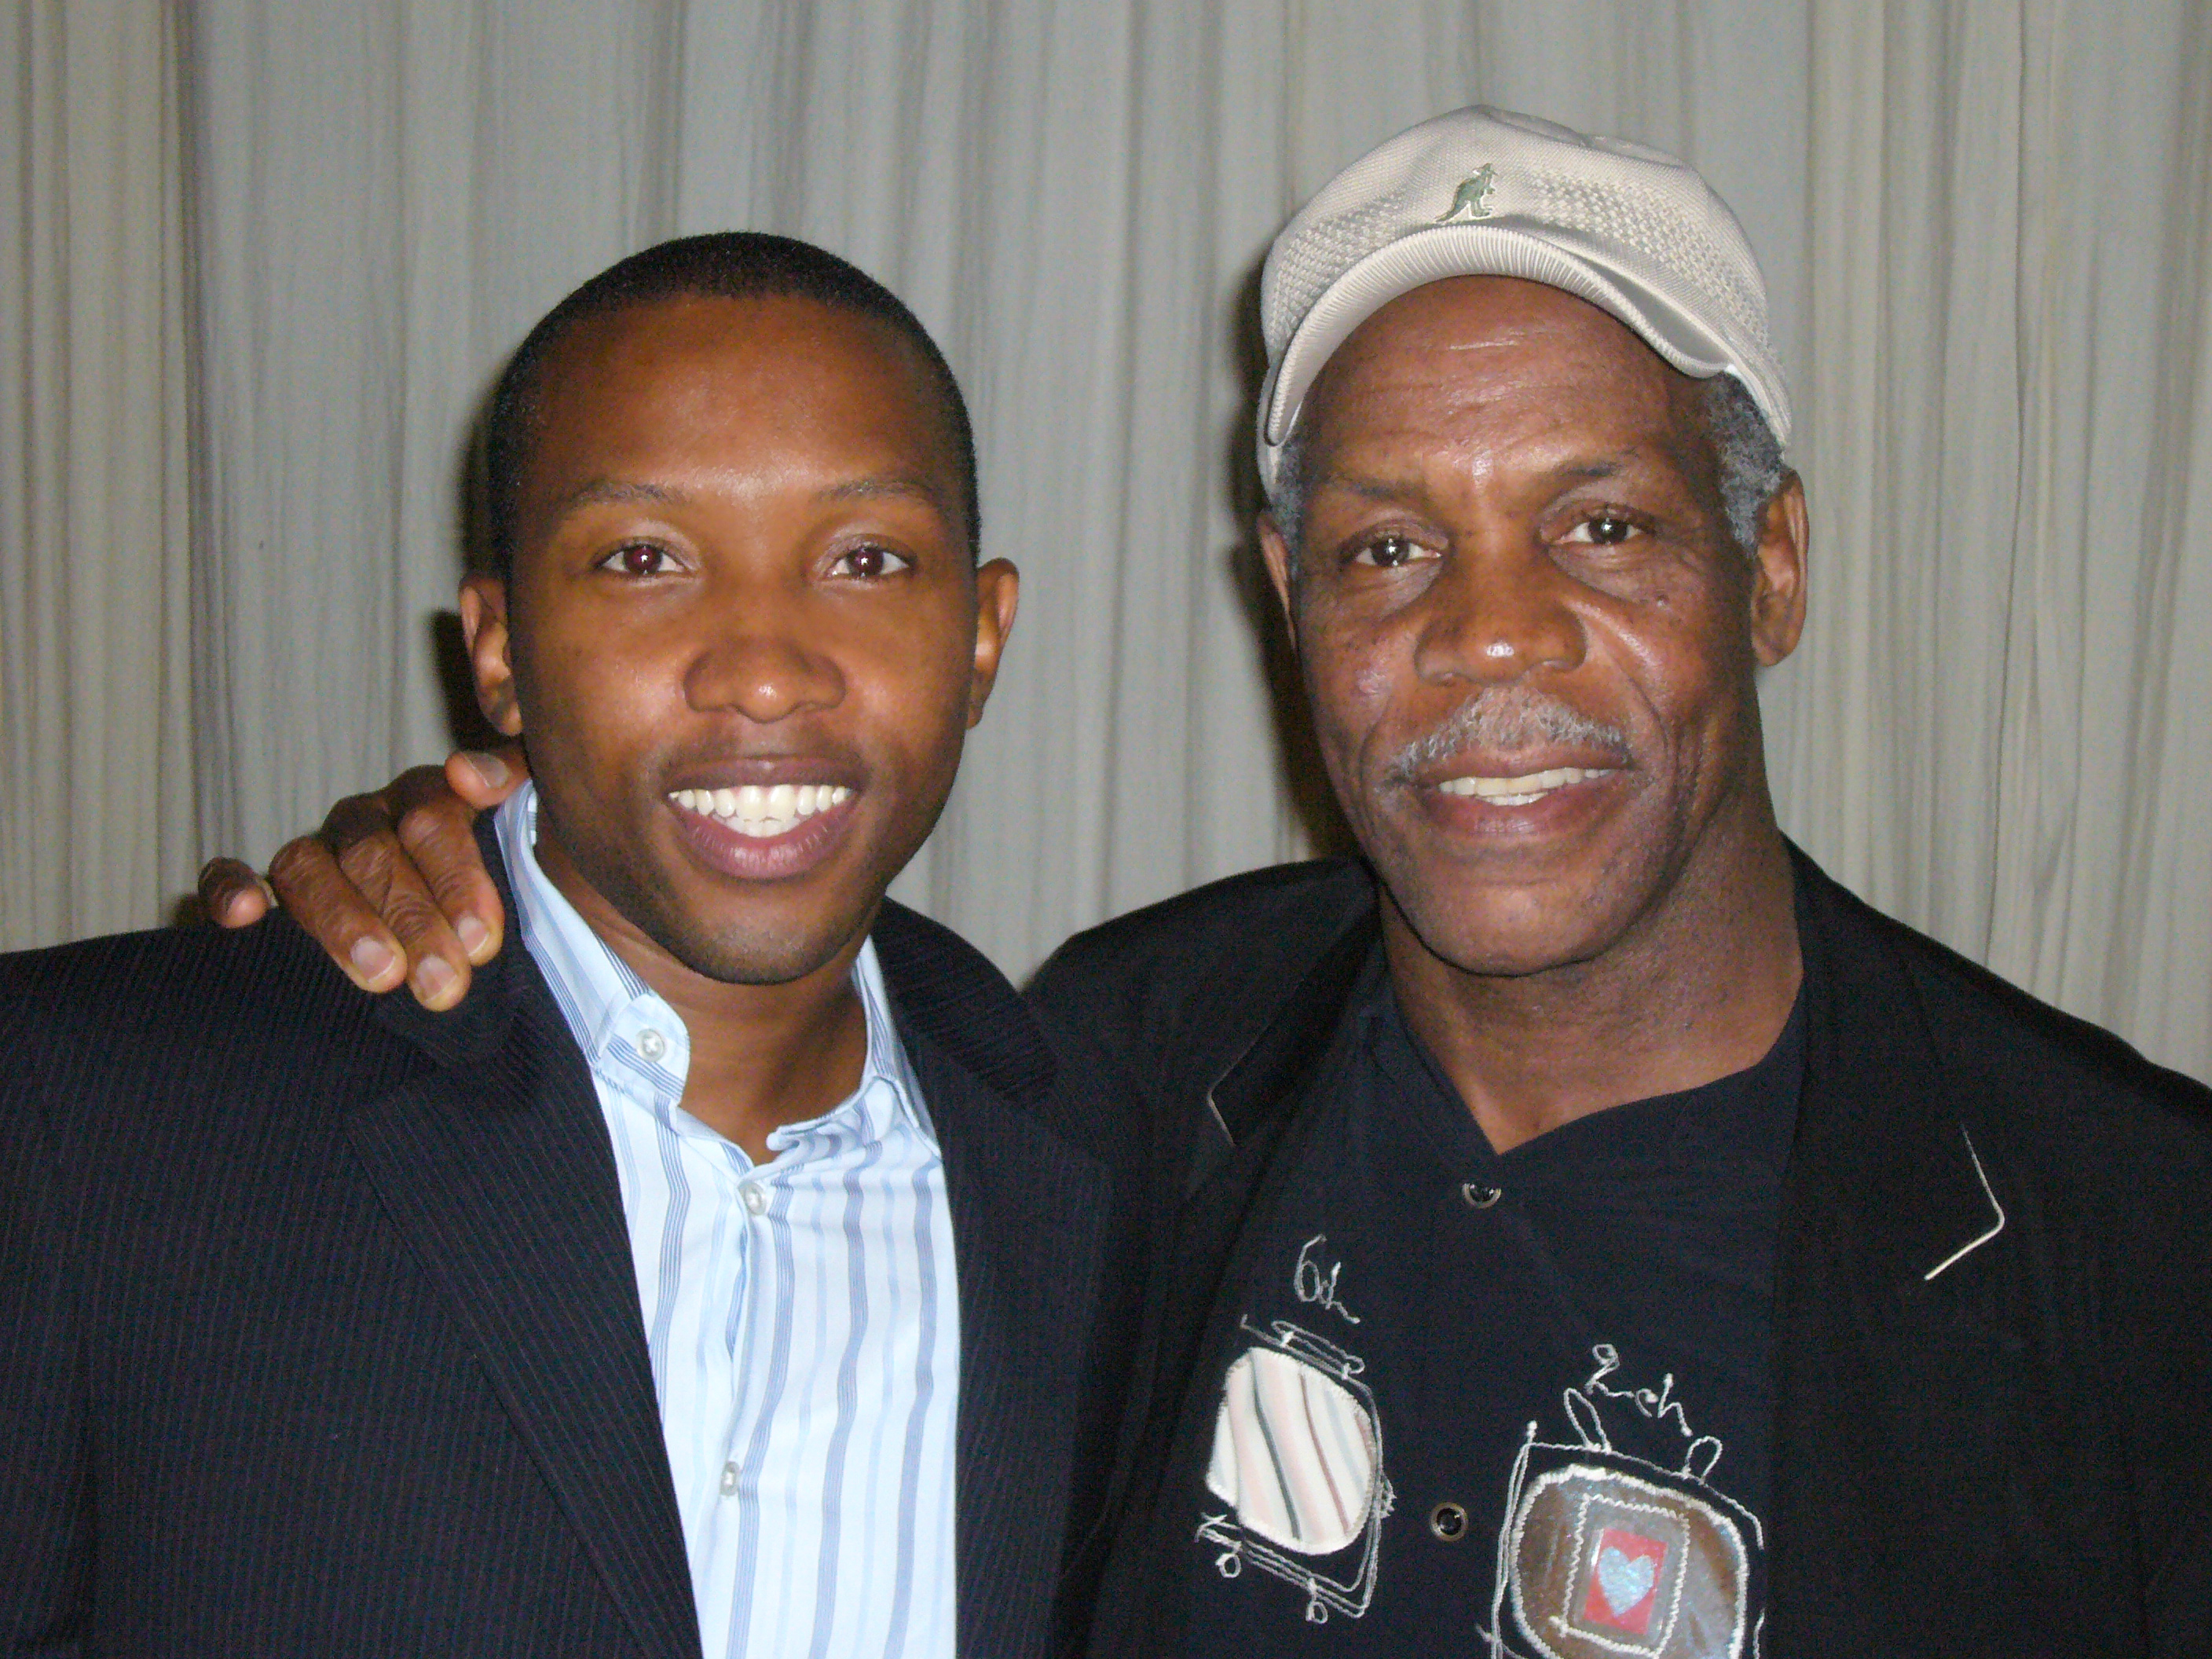 K.C. Collins and Danny Glover at Premier of 